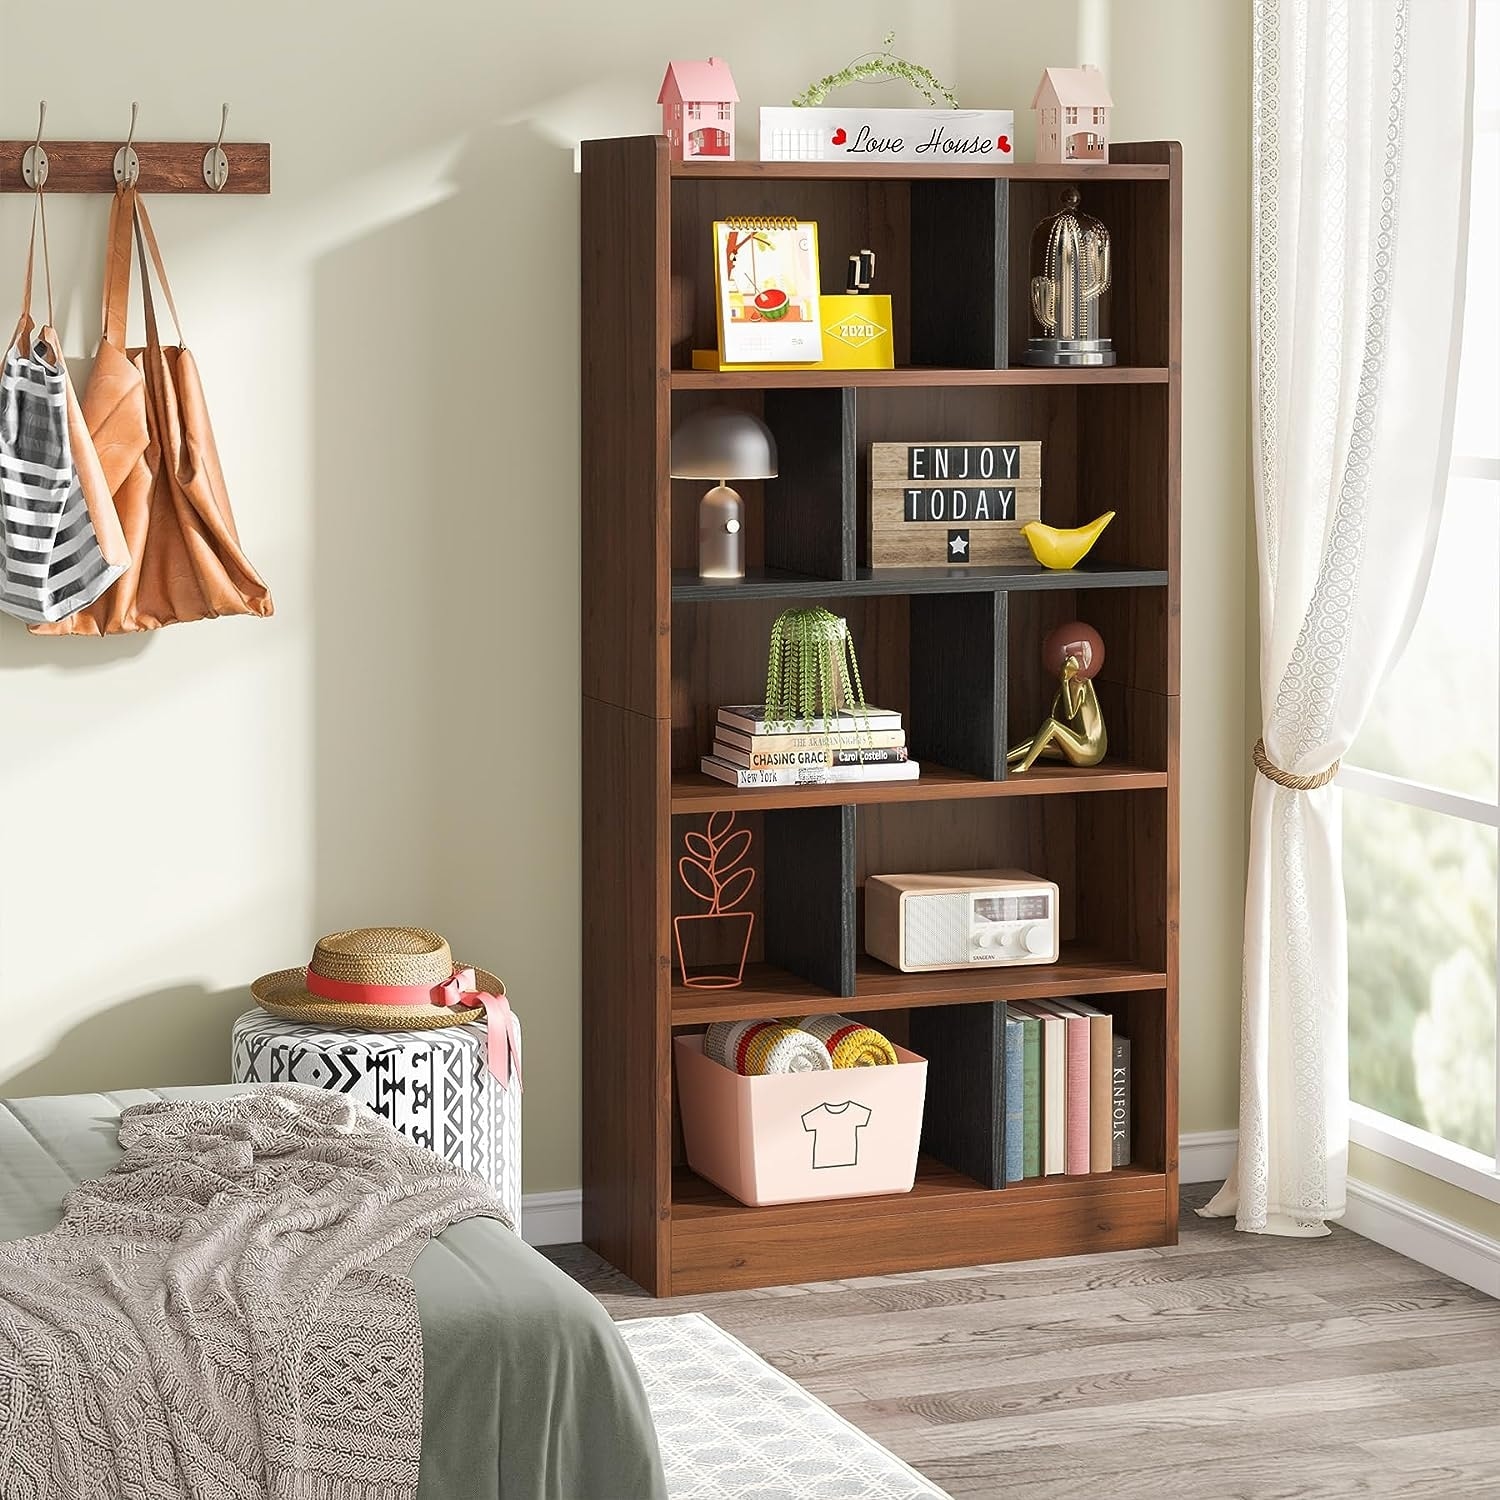 https://ak1.ostkcdn.com/images/products/is/images/direct/ea10cf5526ff667daa9f46d60b1feb9c5a8940ee/72-Inch-Tall-Bookcase%2C-6-Shelf-Bookcase%2C-Floor-Standing-Display-Shelves-Cube-Storage-Organizer-for-Living-Room%2C-Bedroom.jpg